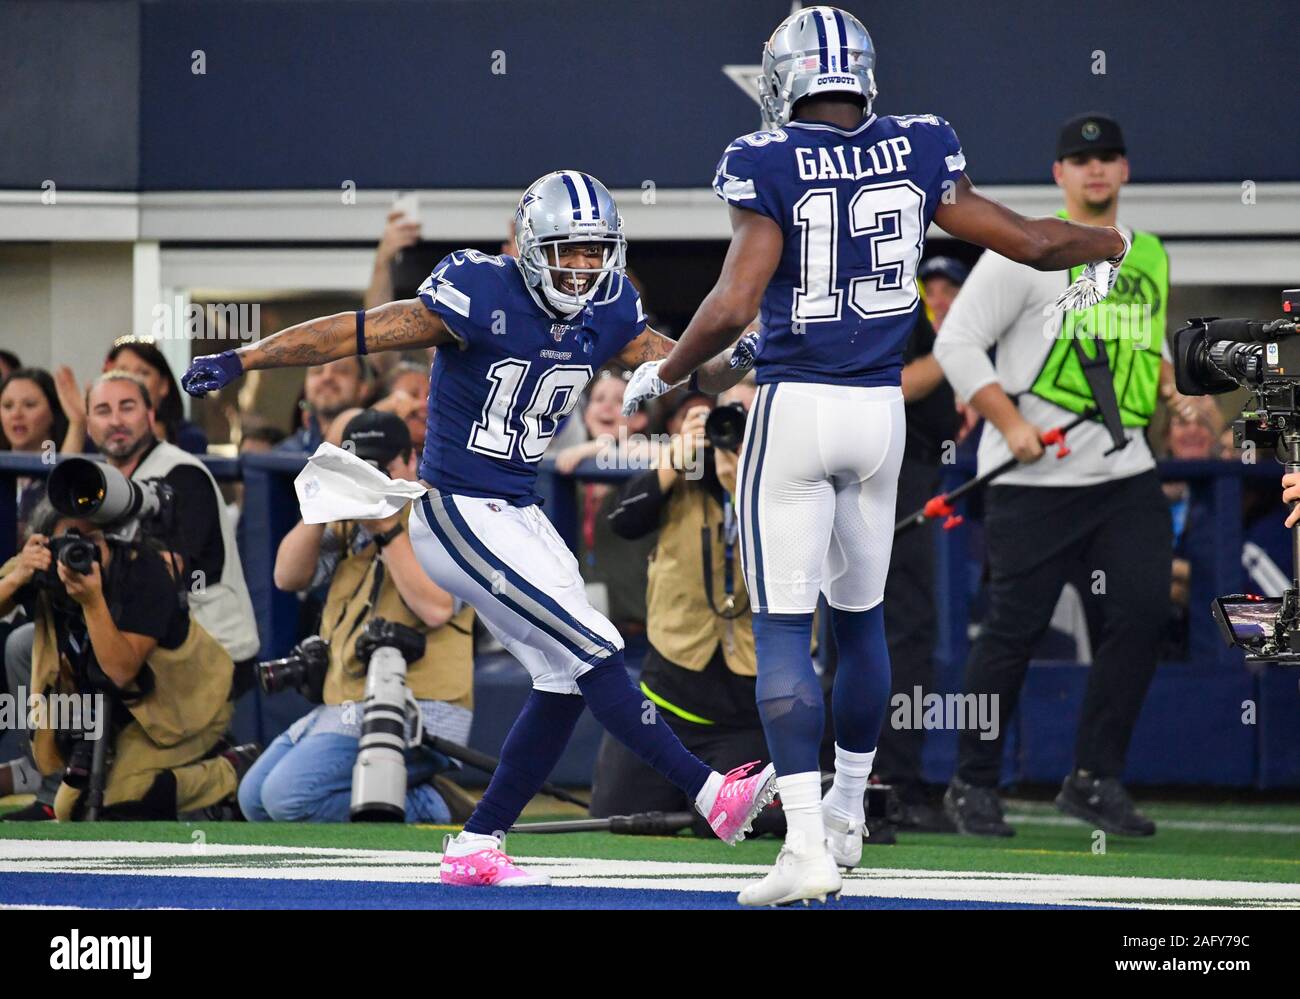 Dec 15, 2019: Dallas Cowboys wide receiver Tavon Austin #10 celebrates with Dallas Cowboys wide receiver Michael Gallup #13 after Austin reception for a touchdown during an NFL game between the Los Angeles Rams and the Dallas Cowboys at AT&T Stadium in Arlington, TX Dallas defeated Los Angeles 44-21 Albert Pena/CSM Stock Photo